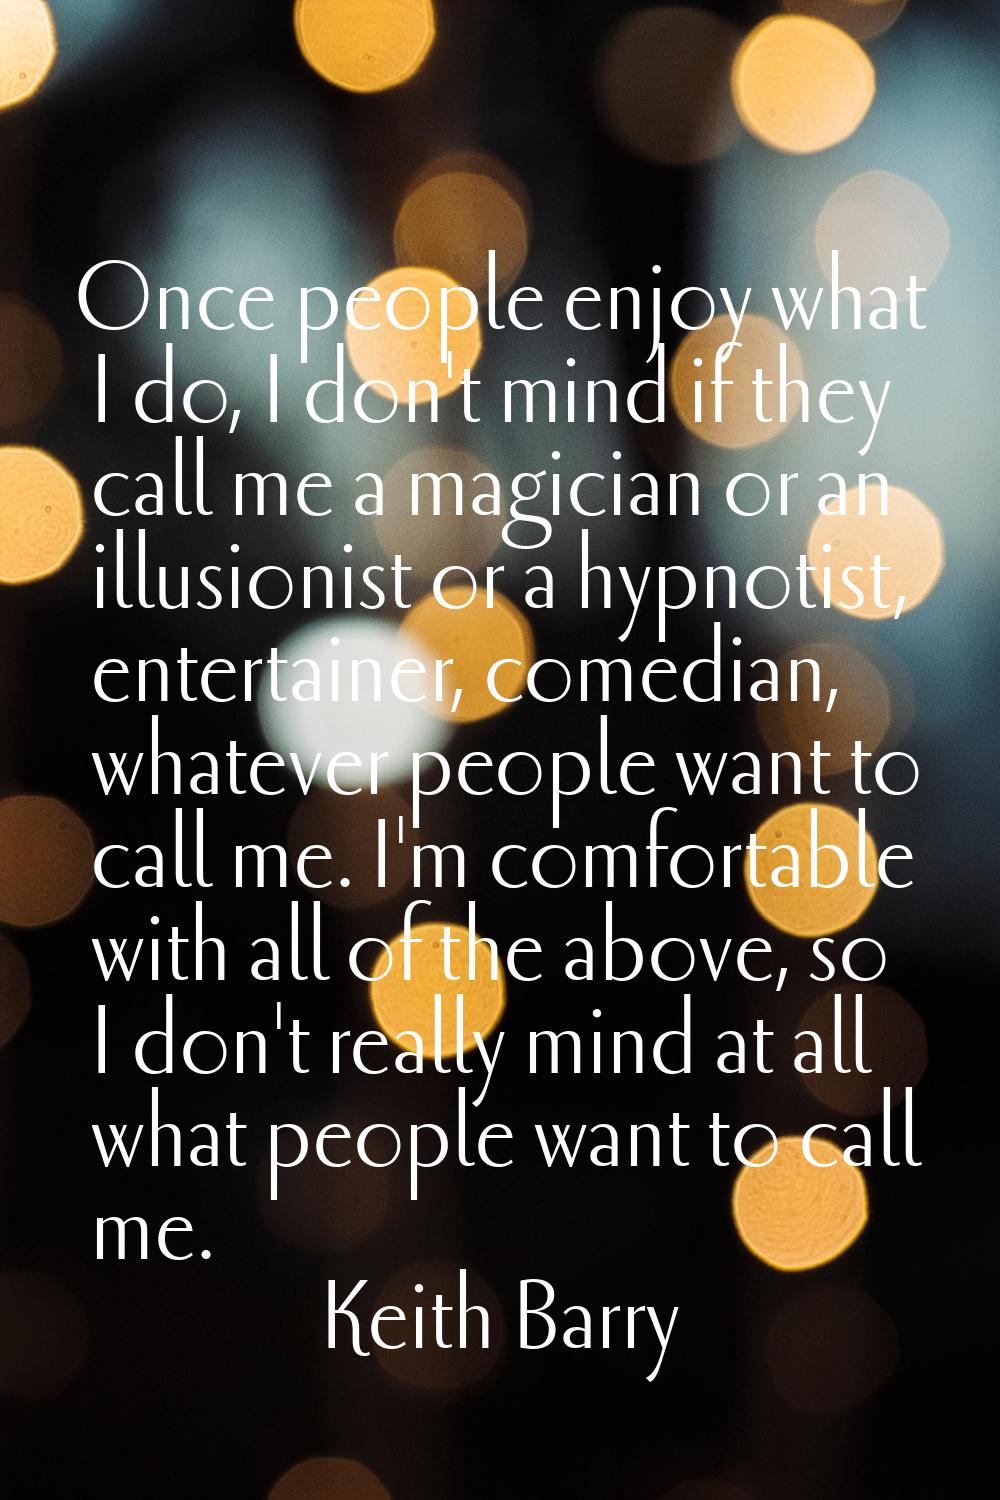 Once people enjoy what I do, I don't mind if they call me a magician or an illusionist or a hypnoti